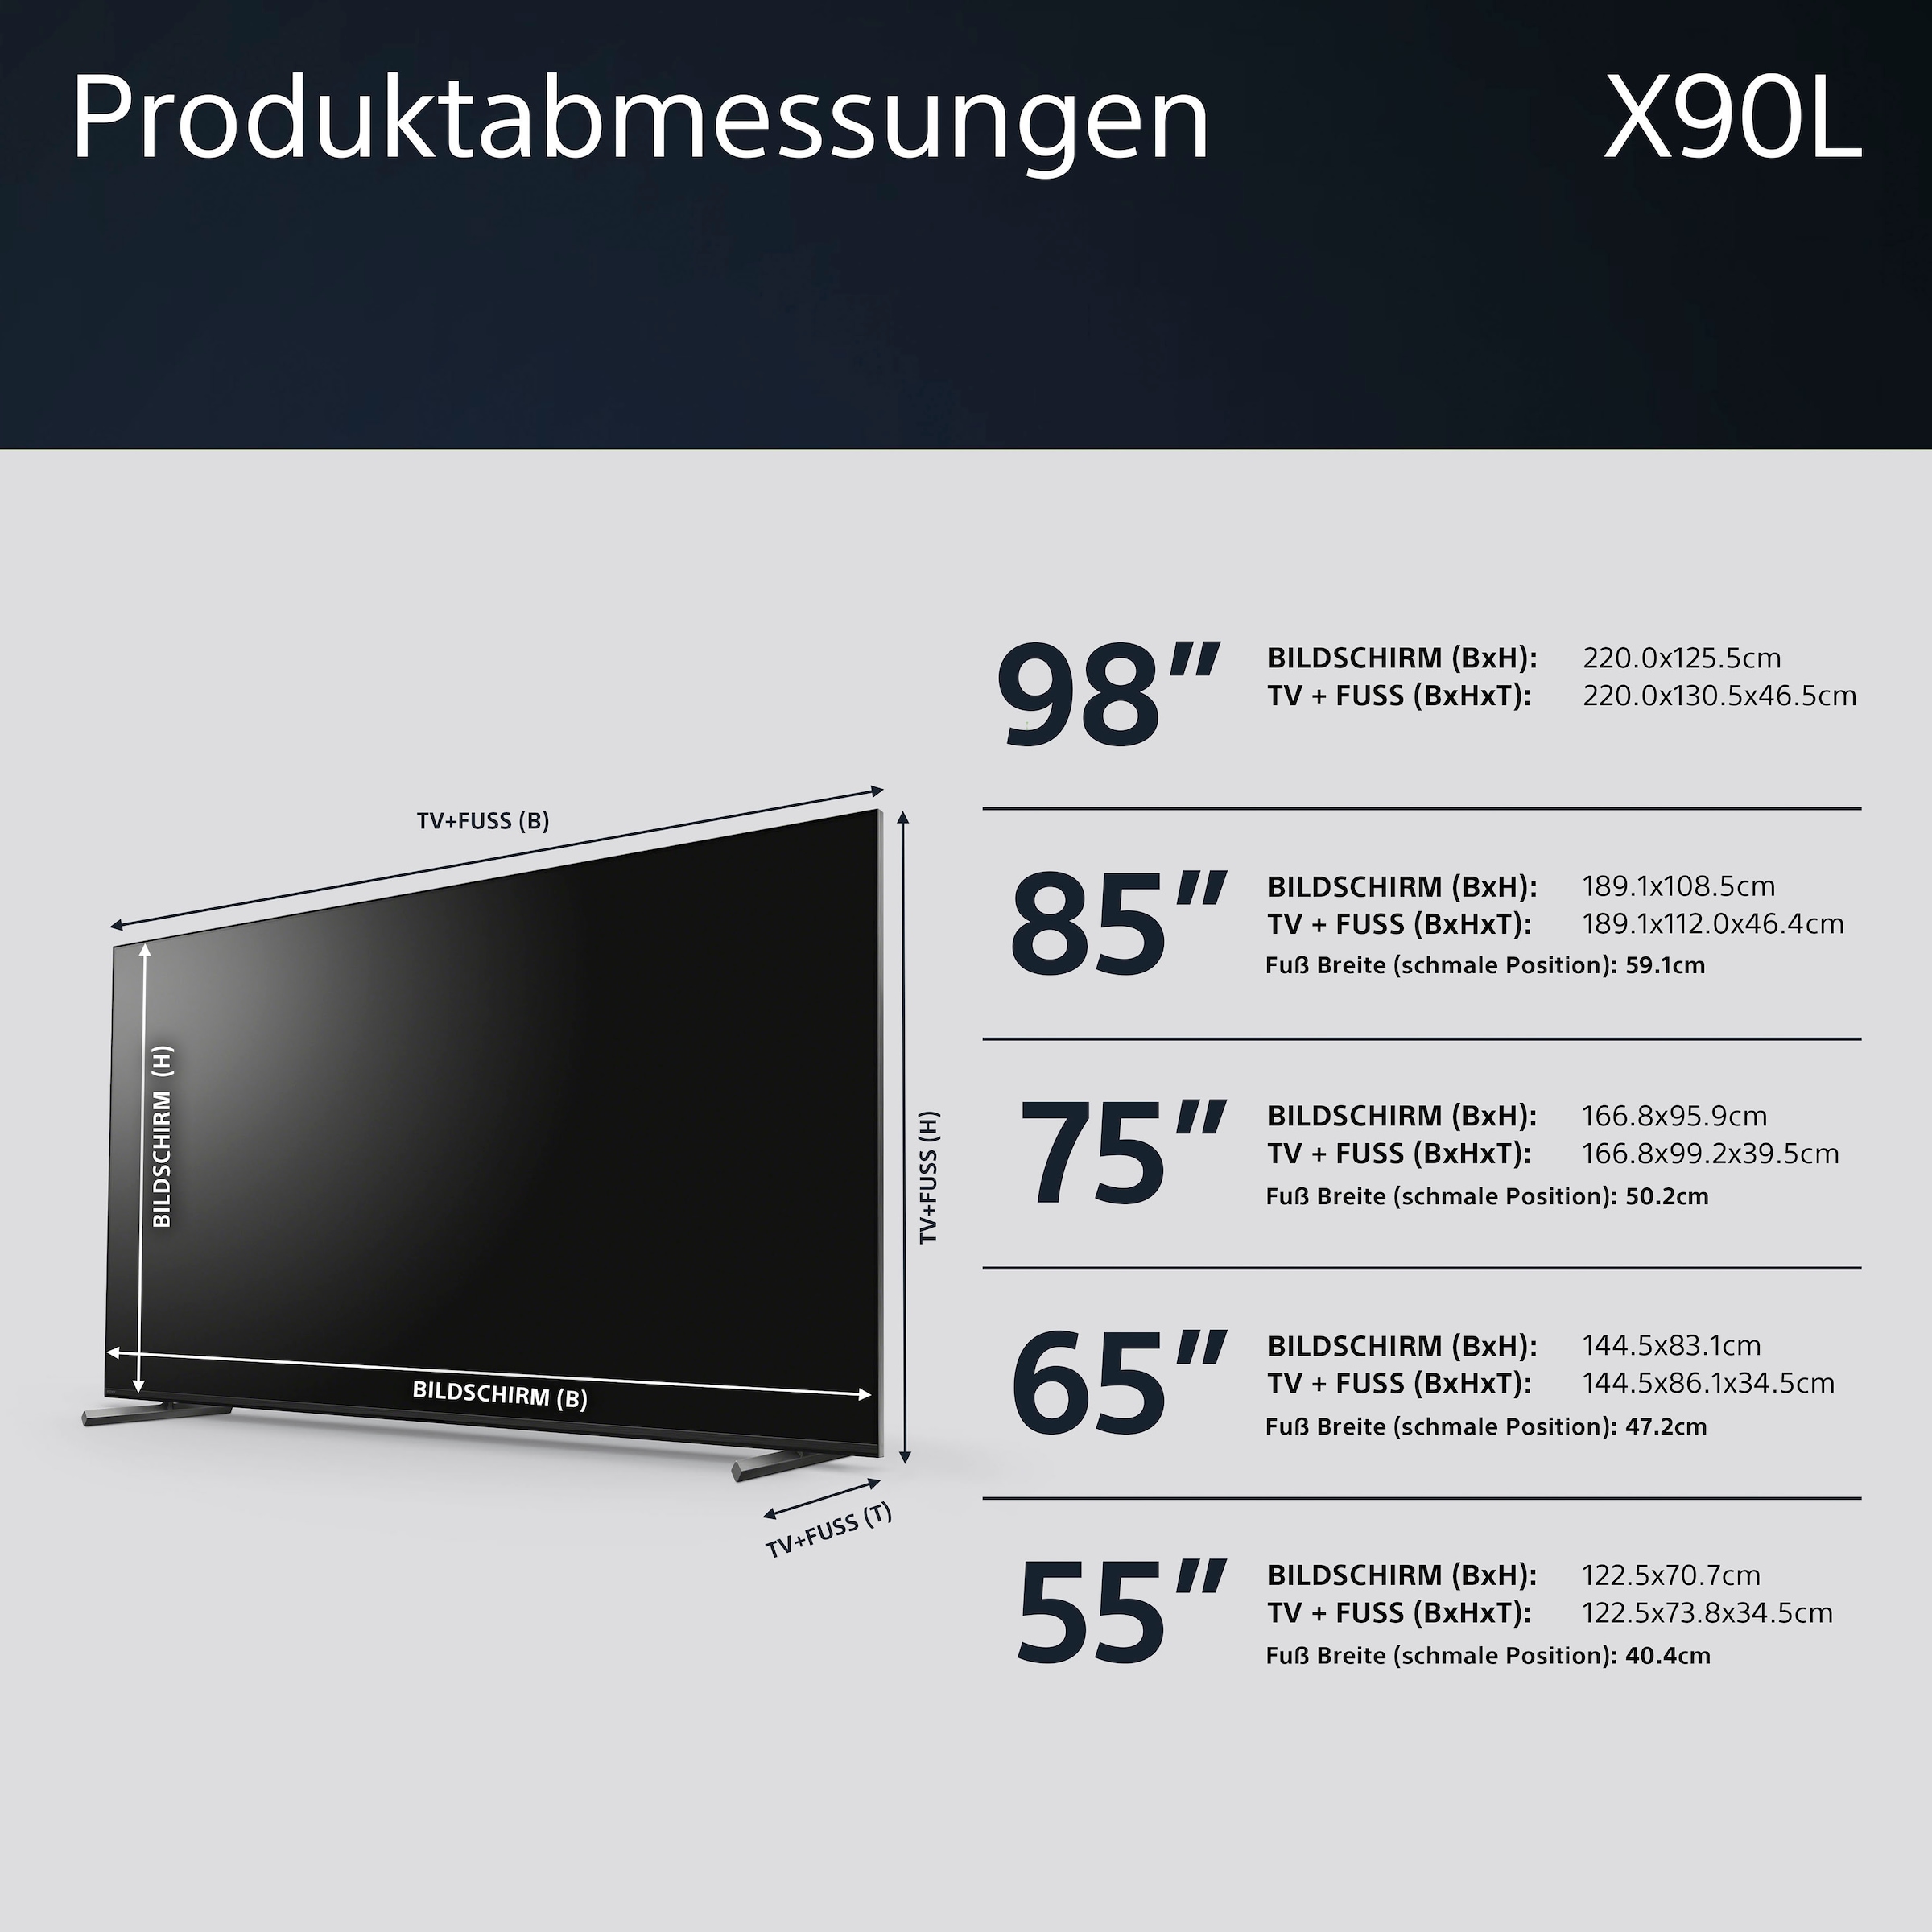 Sony LED-Fernseher, 215 cm/85 Zoll, 4K Ultra HD, Google TV, TRILUMINOS PRO, BRAVIA CORE, mit exklusiven PS5-Features